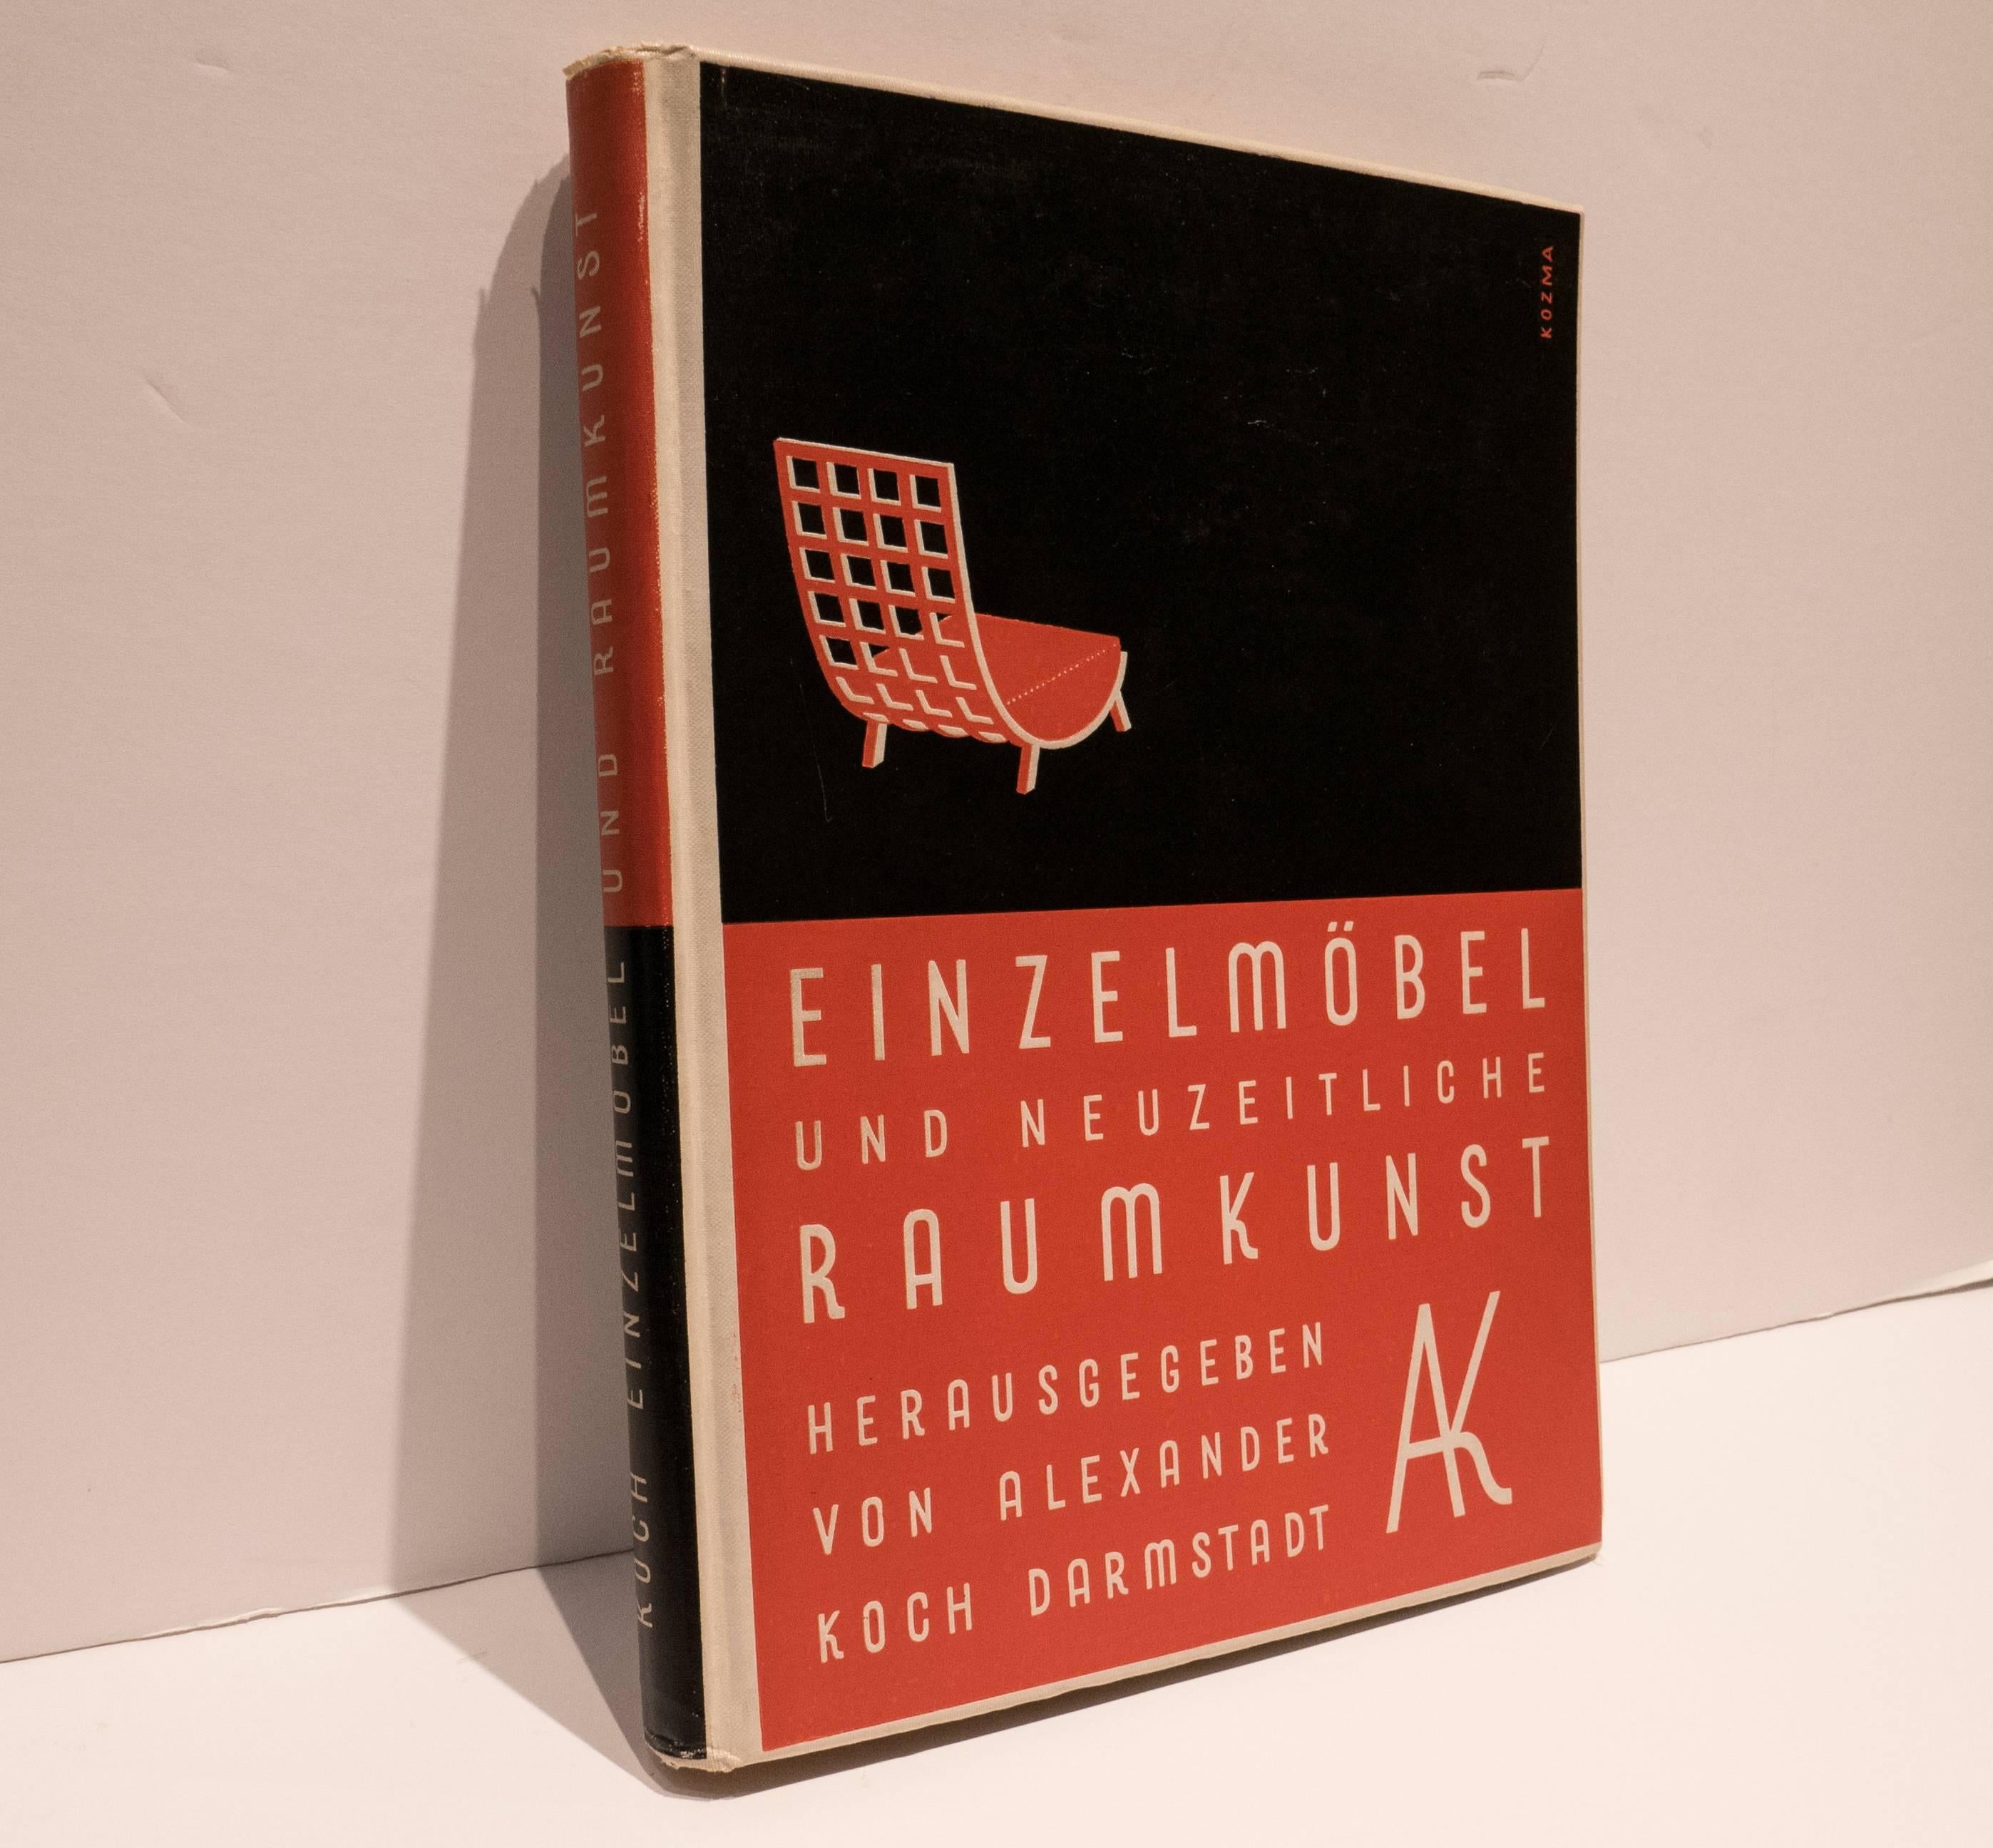 Seminal 1930 survey of early modernist furniture and interior design projects by known German and other European designers. Approximately 200 different designs featuring about 70 designs by Ludwig Kozma, who designed the striking red and black cover